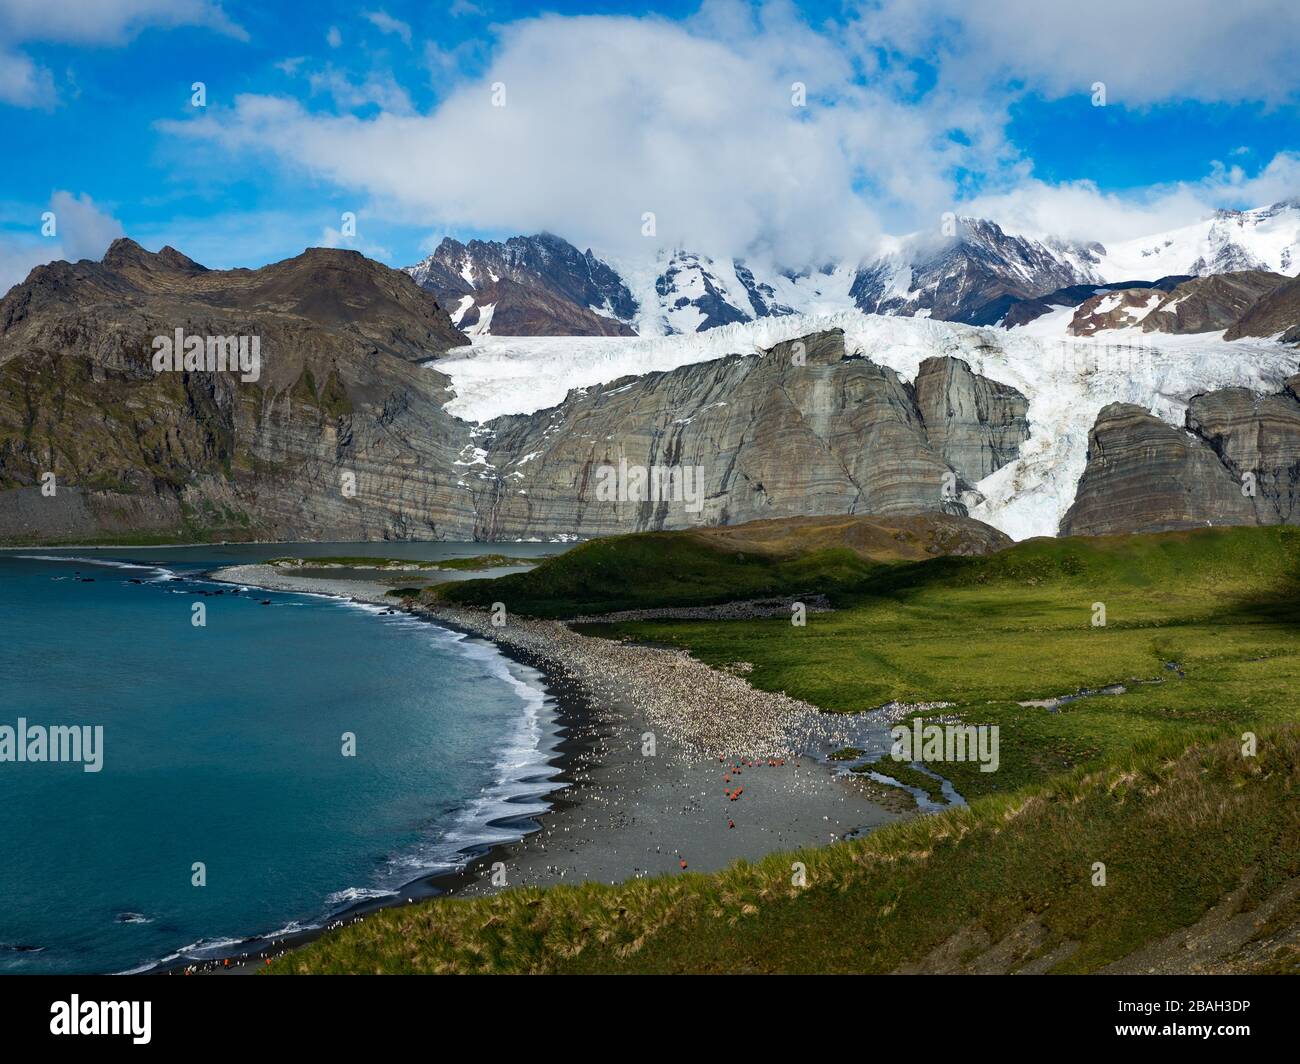 Stunning views over Gold Harbor, South Georgia Island with a large king penguin colony Stock Photo